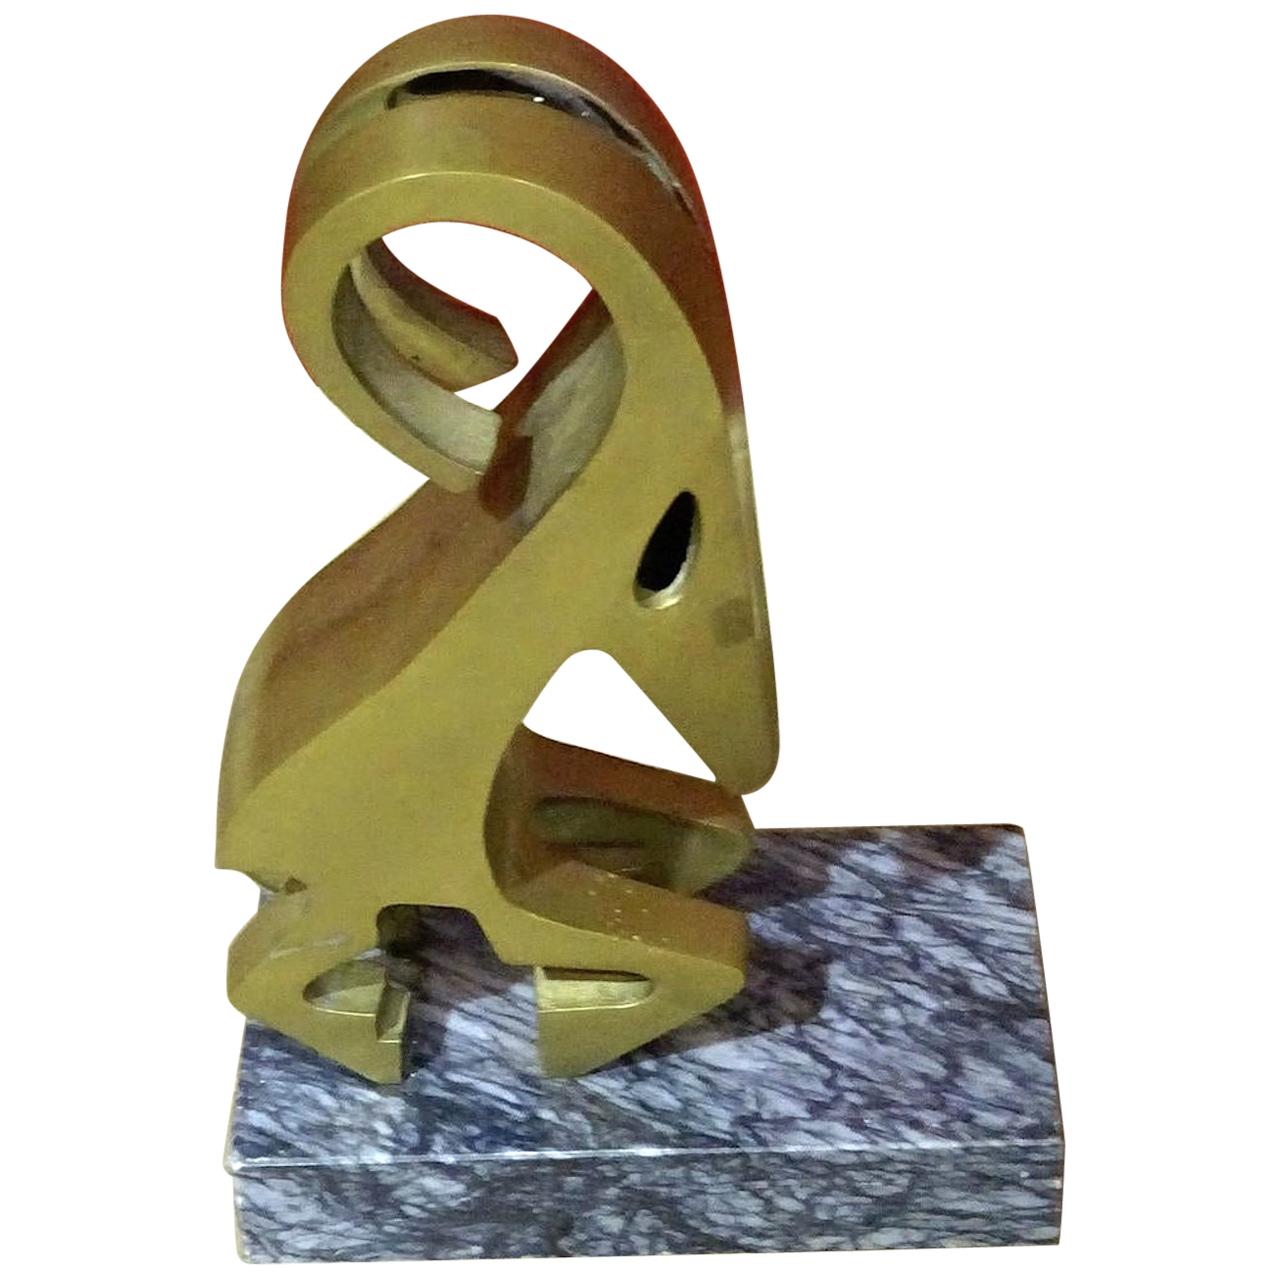 Unique Brass and Marble Sculpture